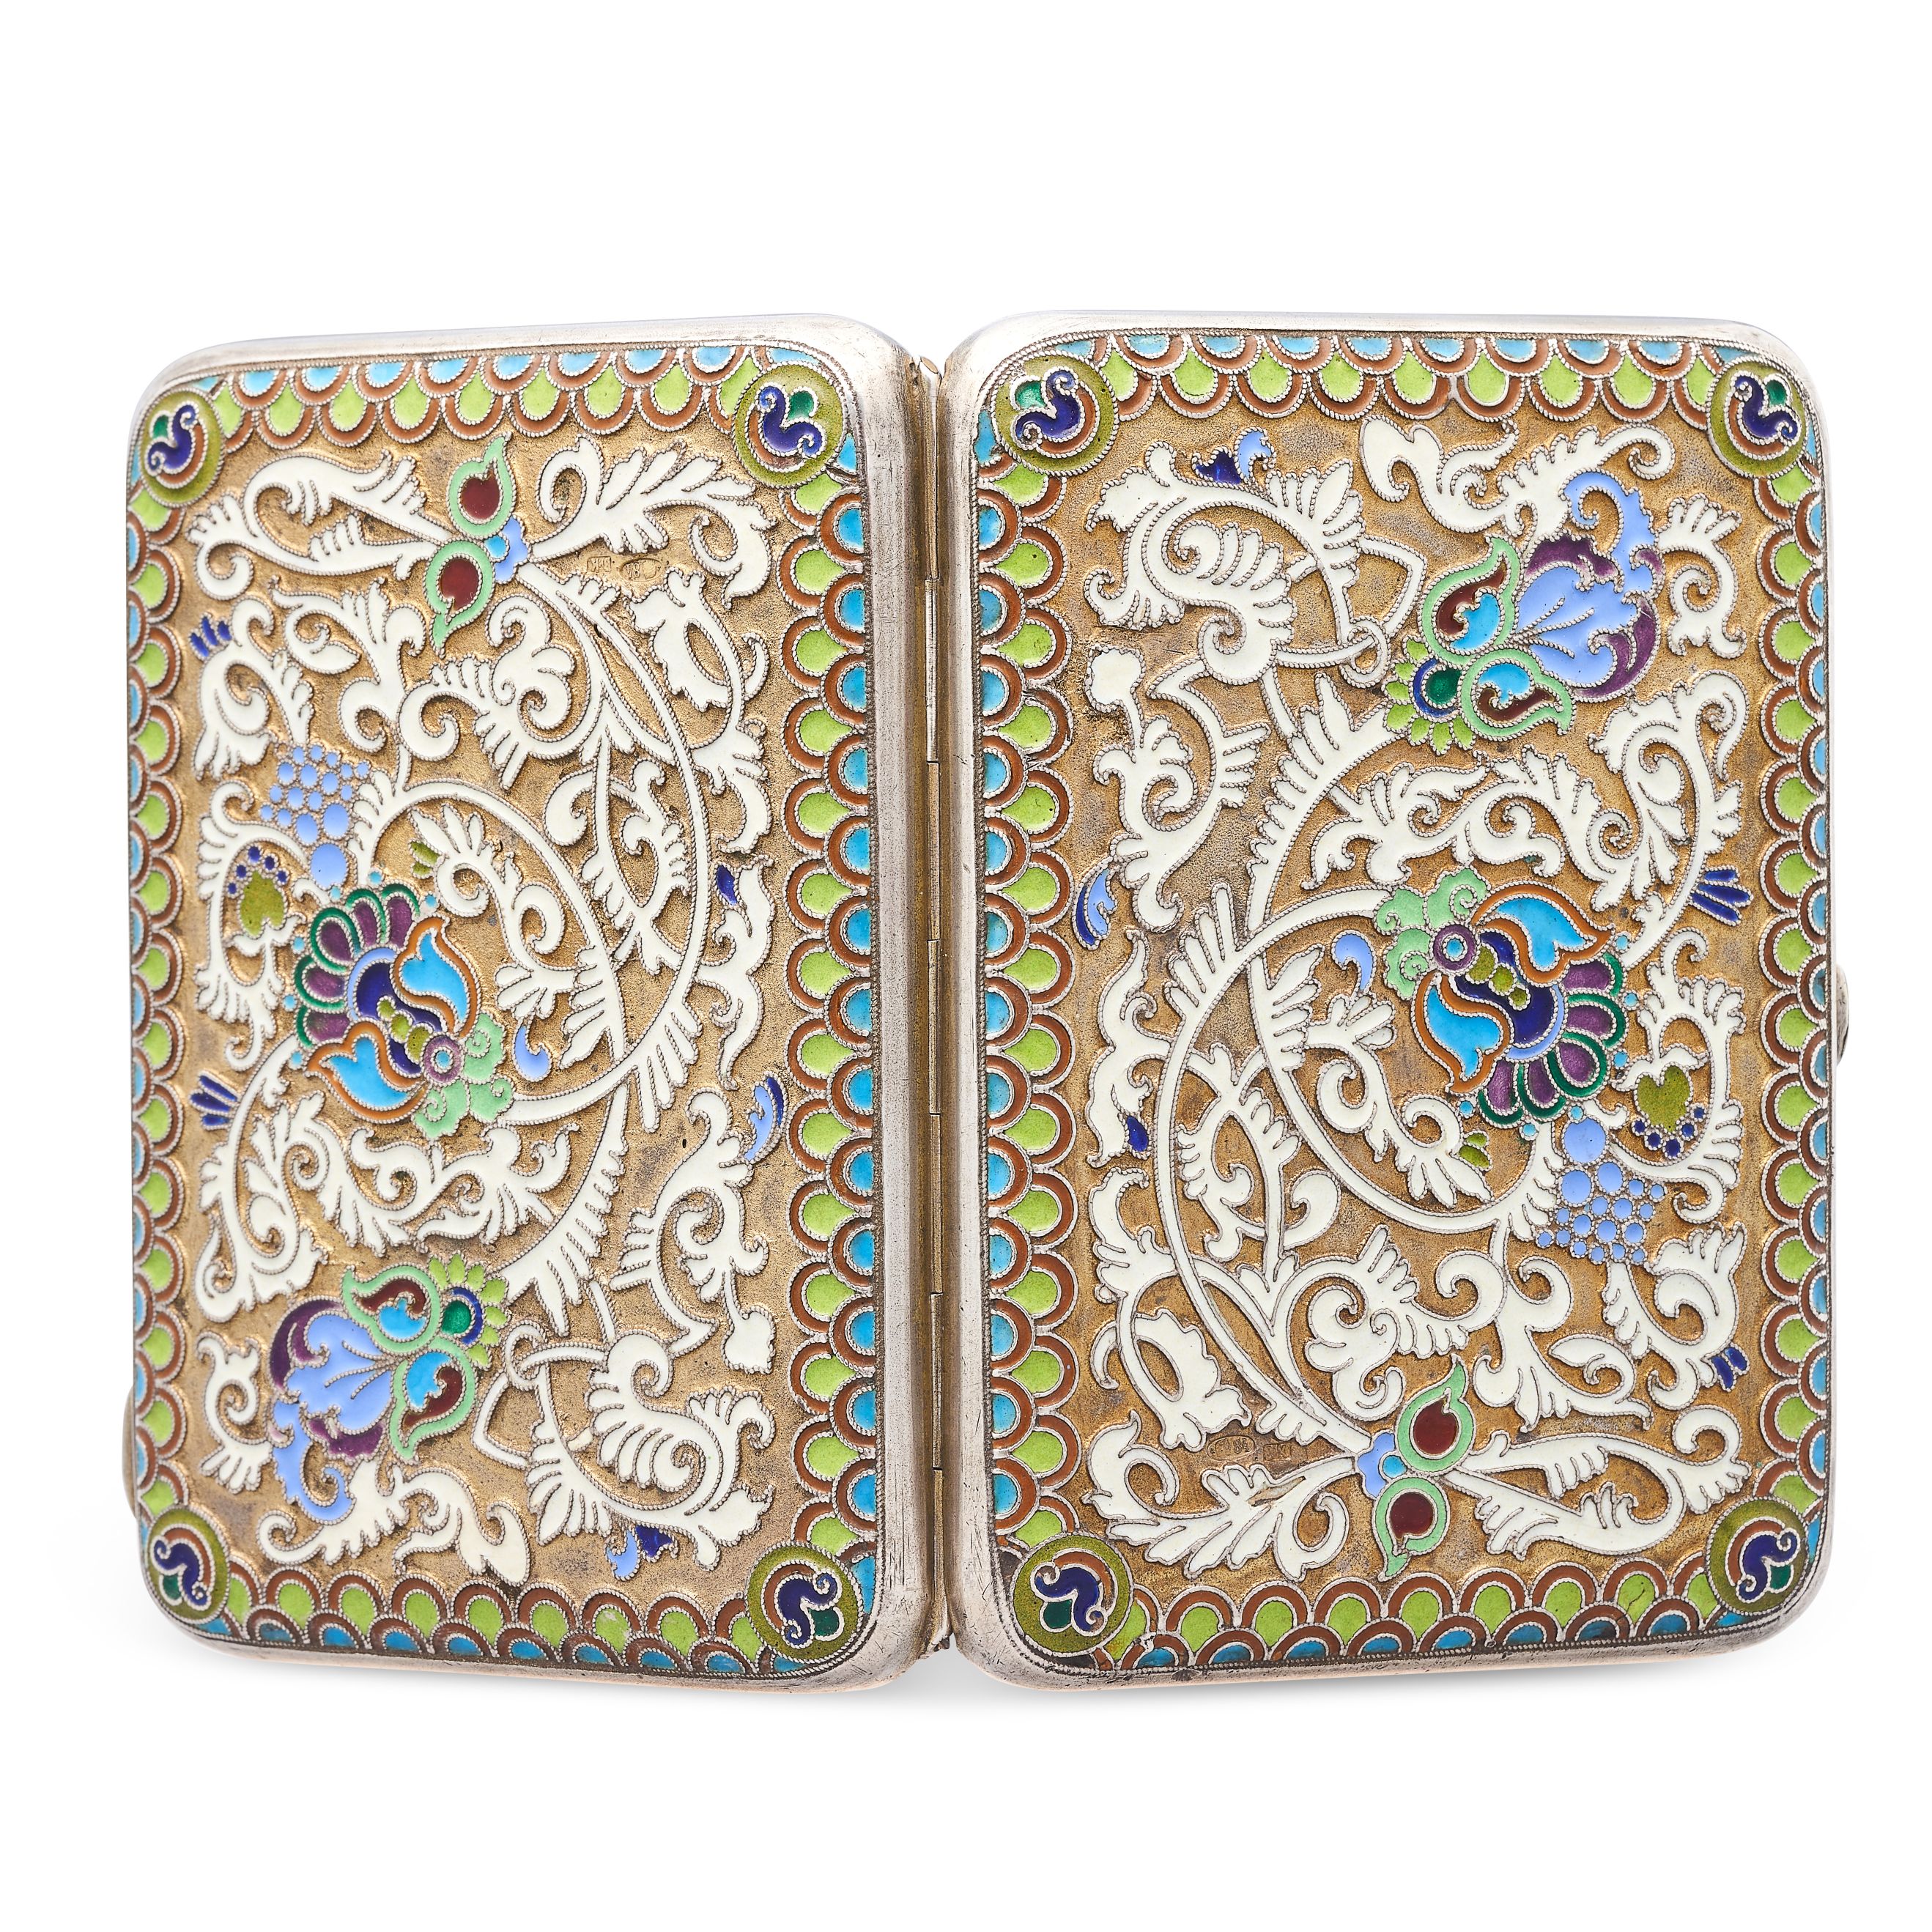 AN ANTIQUE IMPERIAL RUSSIAN SILVER ENAMEL CIGARETTE CASE, VORONTSOV & COMPANY, MOSOCW 1908-1917 in - Image 3 of 3